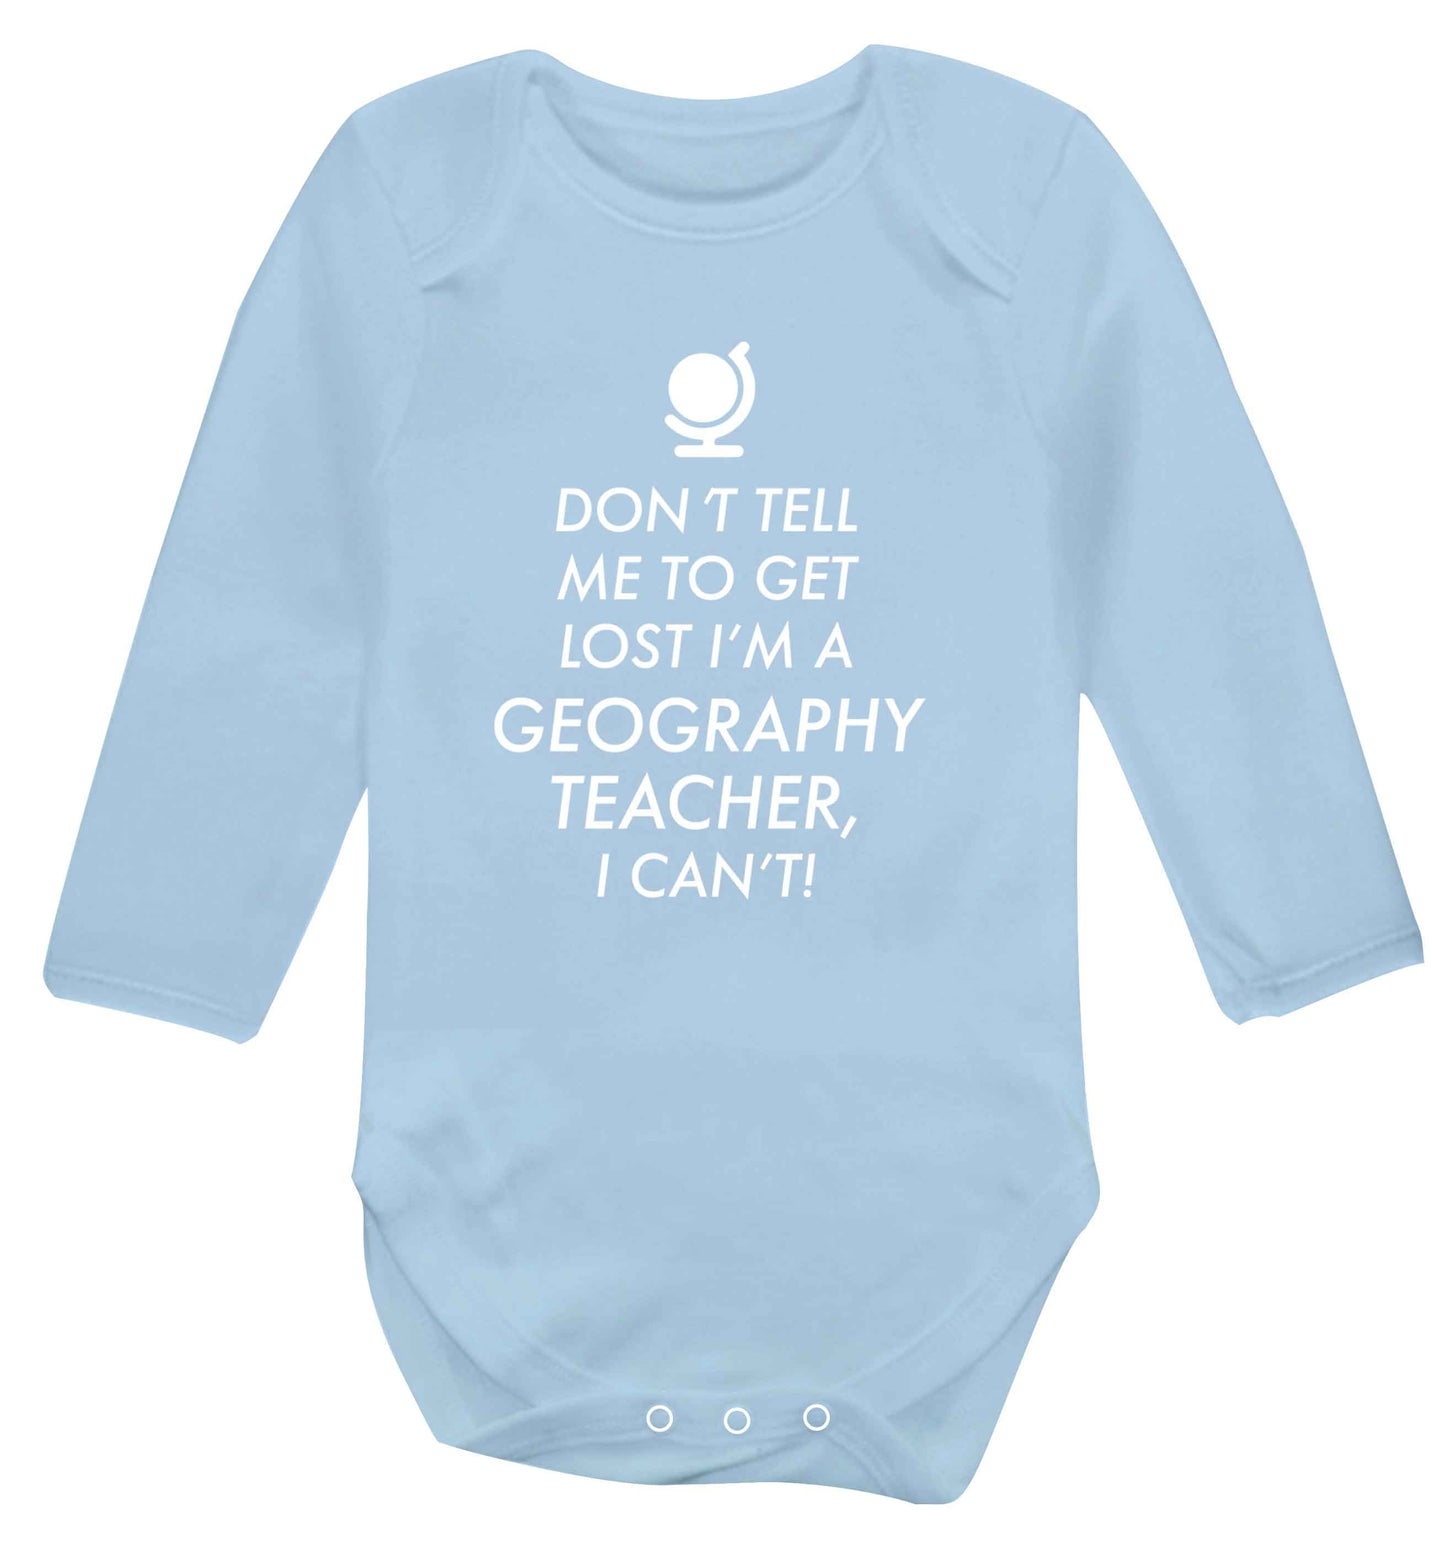 Don't tell me to get lost I'm a geography teacher, I can't Baby Vest long sleeved pale blue 6-12 months